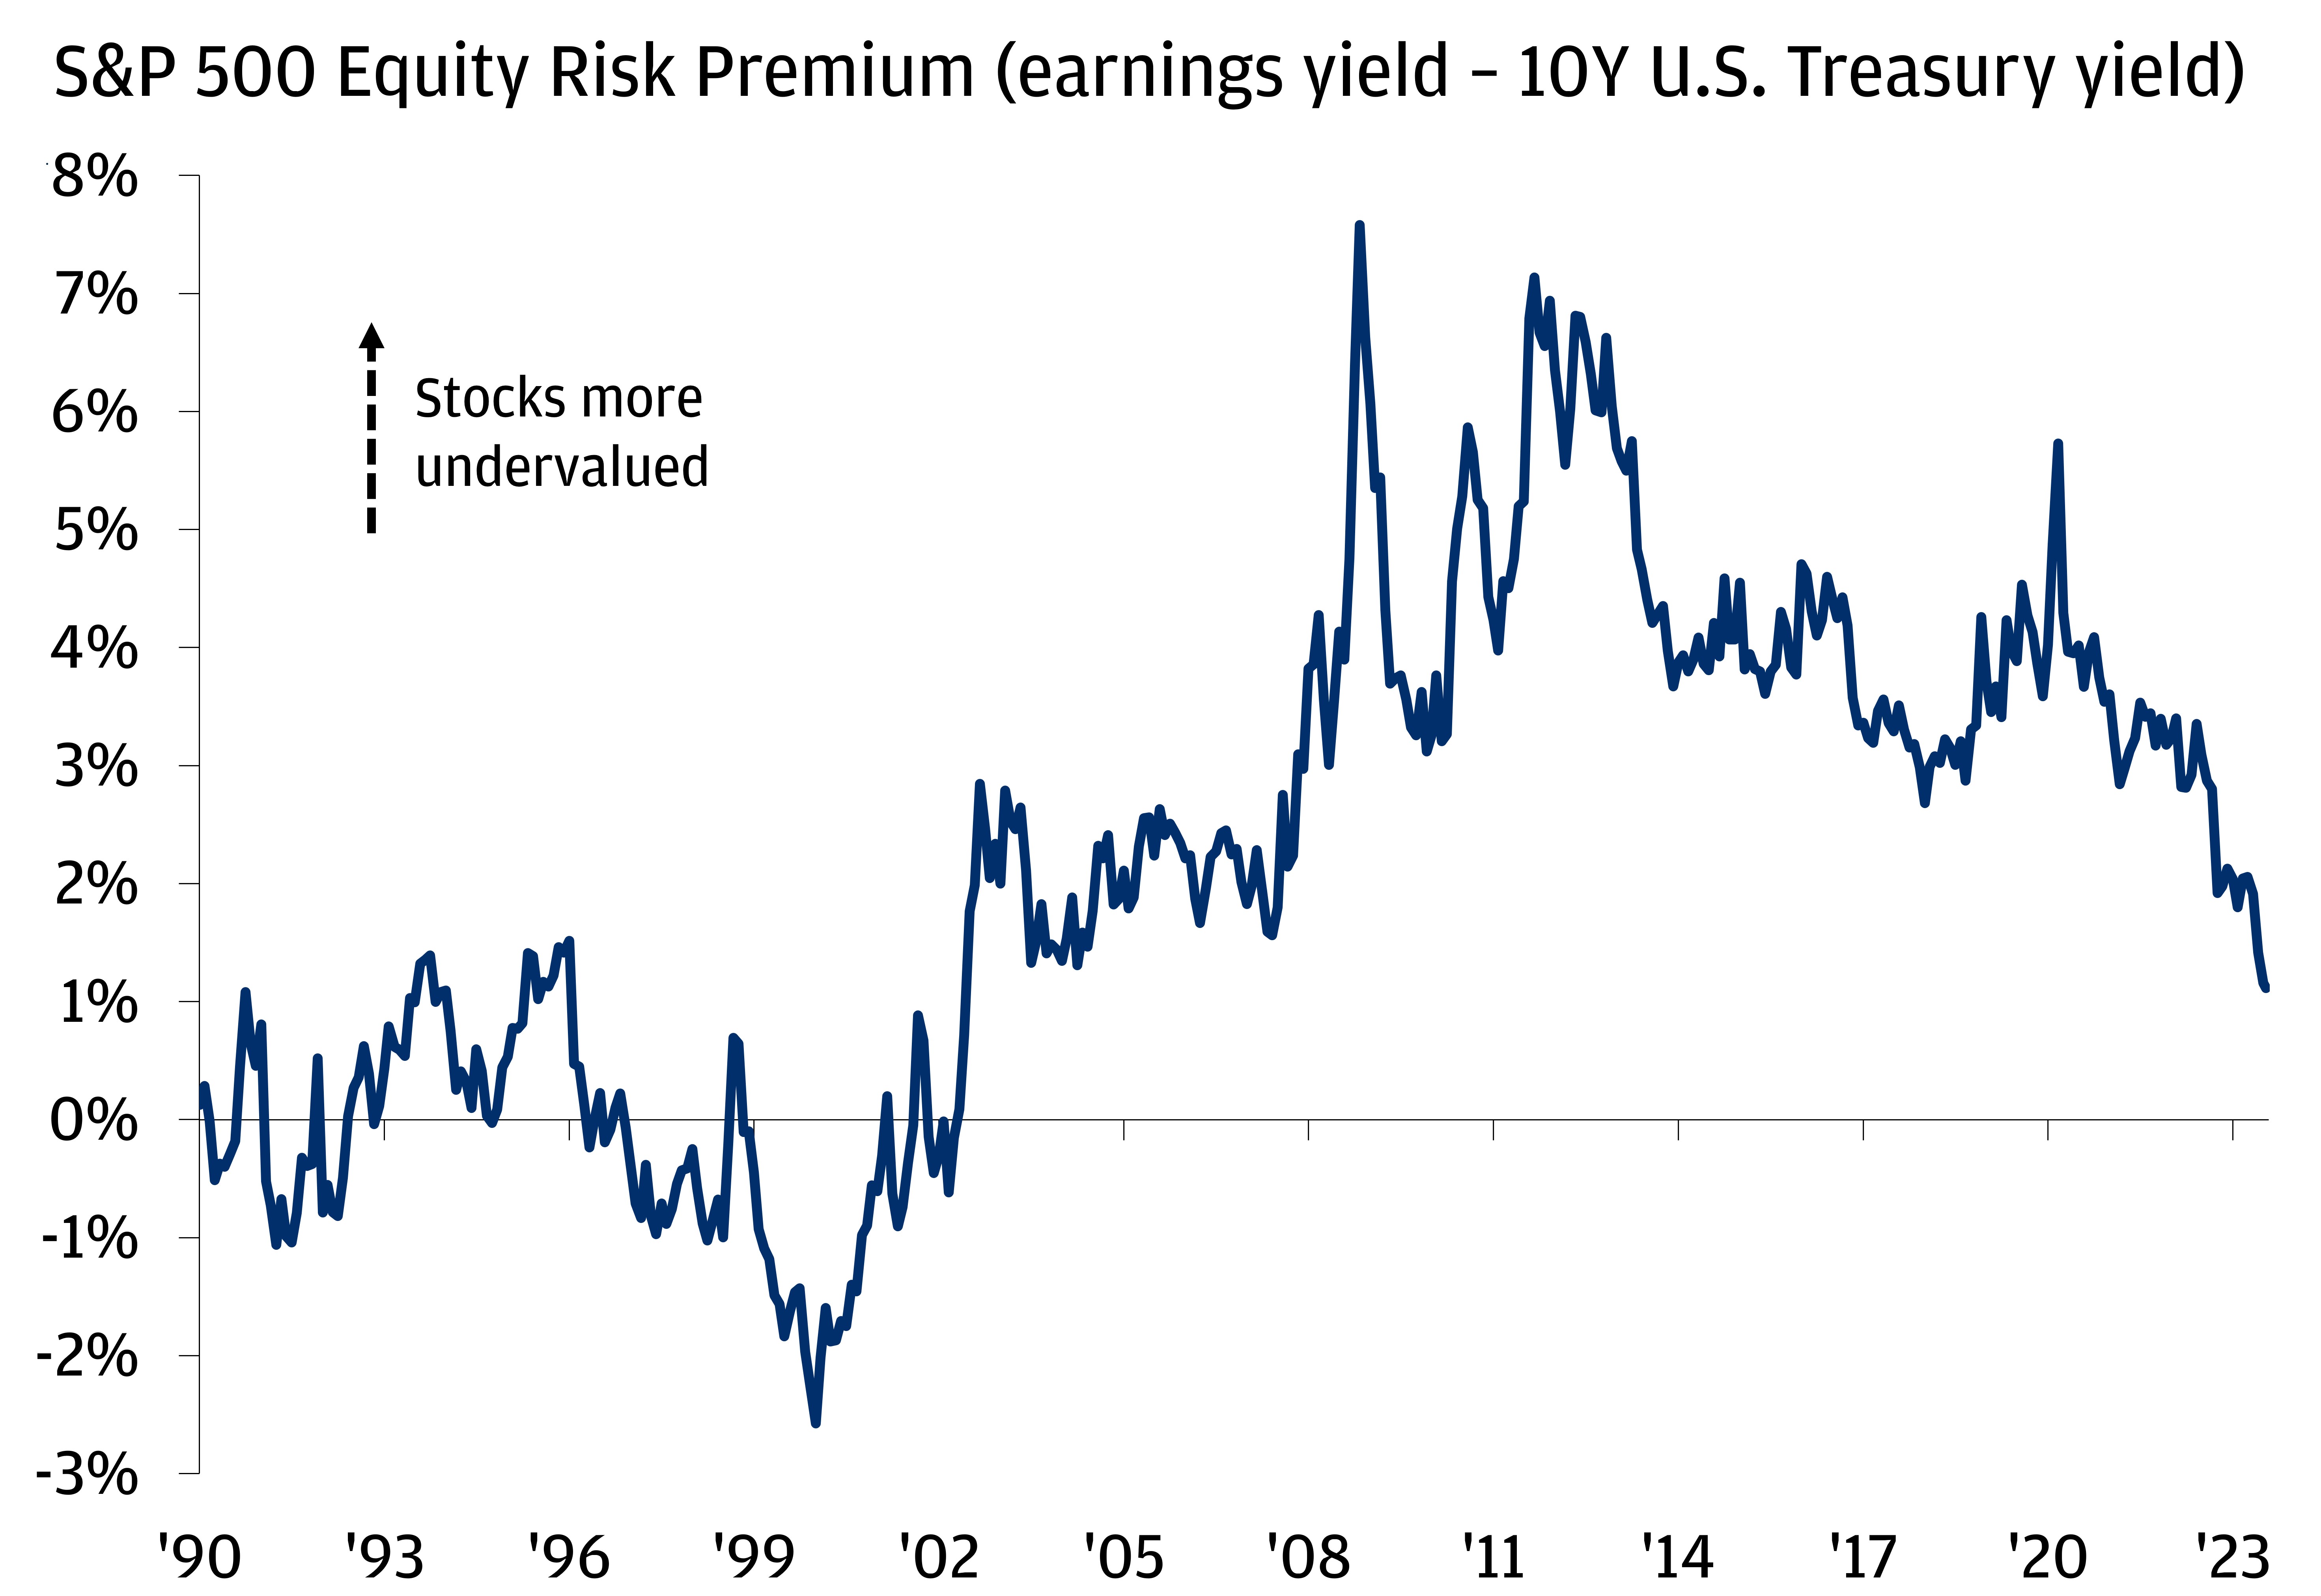 This chart shows the equity risk premium for the S&P 500 equity Index in percentage points from 1990 through July 2023. The equity risk premium is calculated by the earnings yield of the S&P 500 minus the yield on the U.S. 10-year Treasury bond.